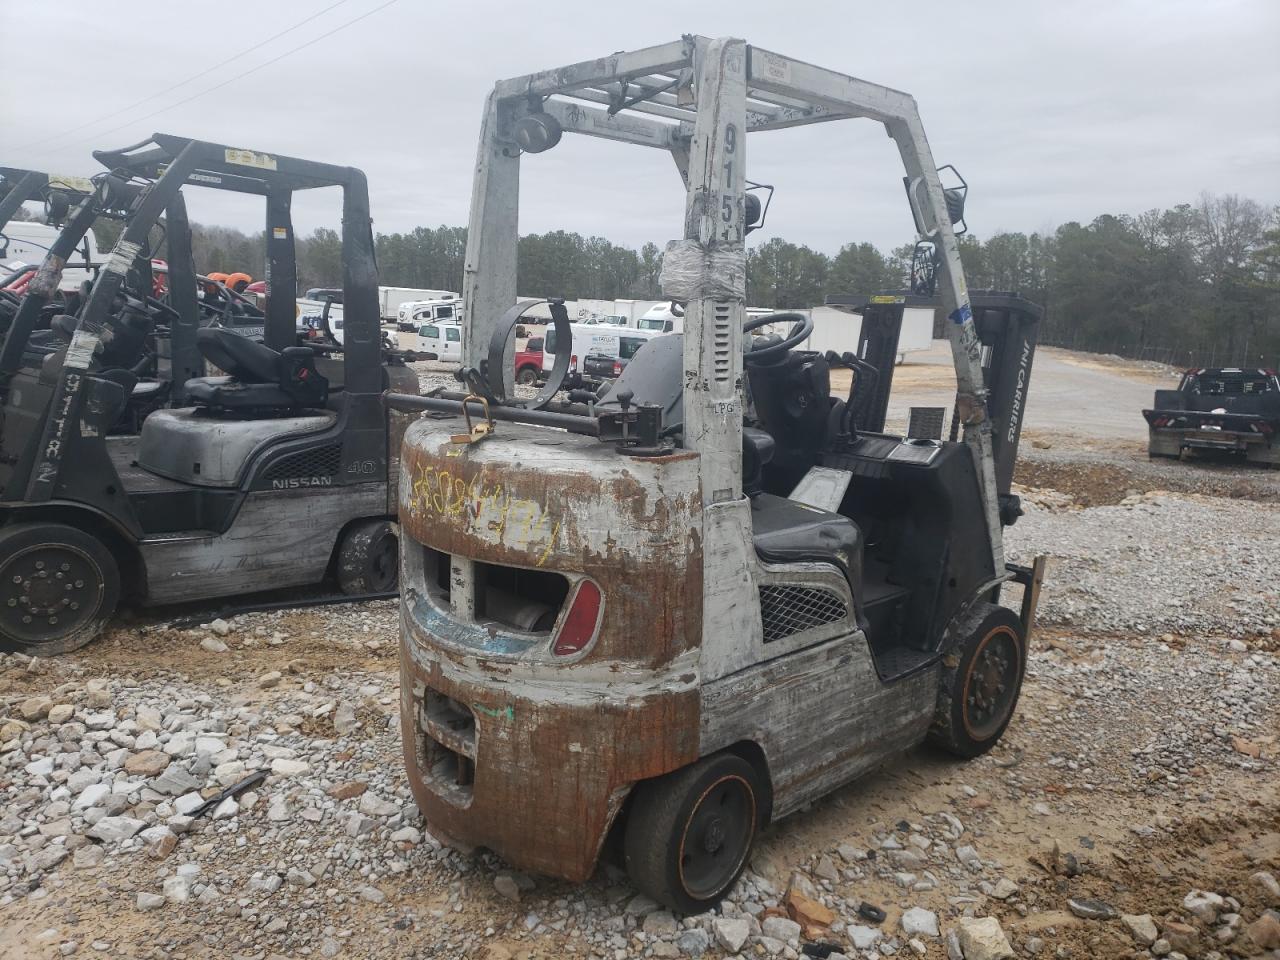 CP1F29W**** Salvage and Wrecked 2014 Nissan Forklift in Alabama State